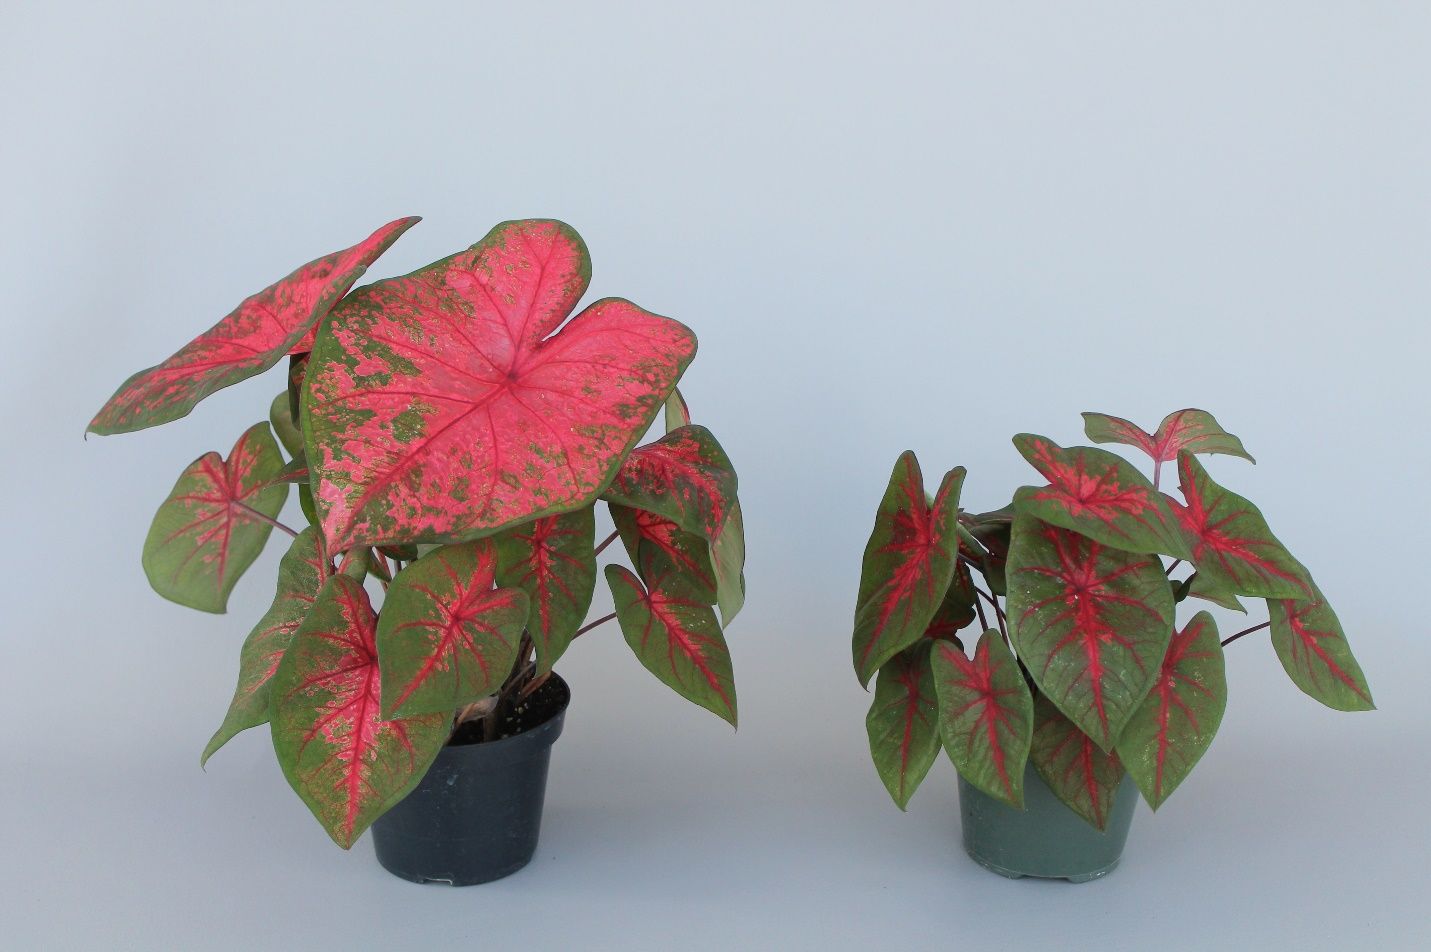 Plants of ‘Lava Glow’ caladium forced from one intact (left) or de-eyed (right) No. 1 (1.5 to 2.5 inches in diameter) tuber in a small container (5-inch diameter). Tubers were planted on 1 May 2020, and plants were grown in a greenhouse with approximately 30% light exclusion. The photo was taken on 22 June 2020. 